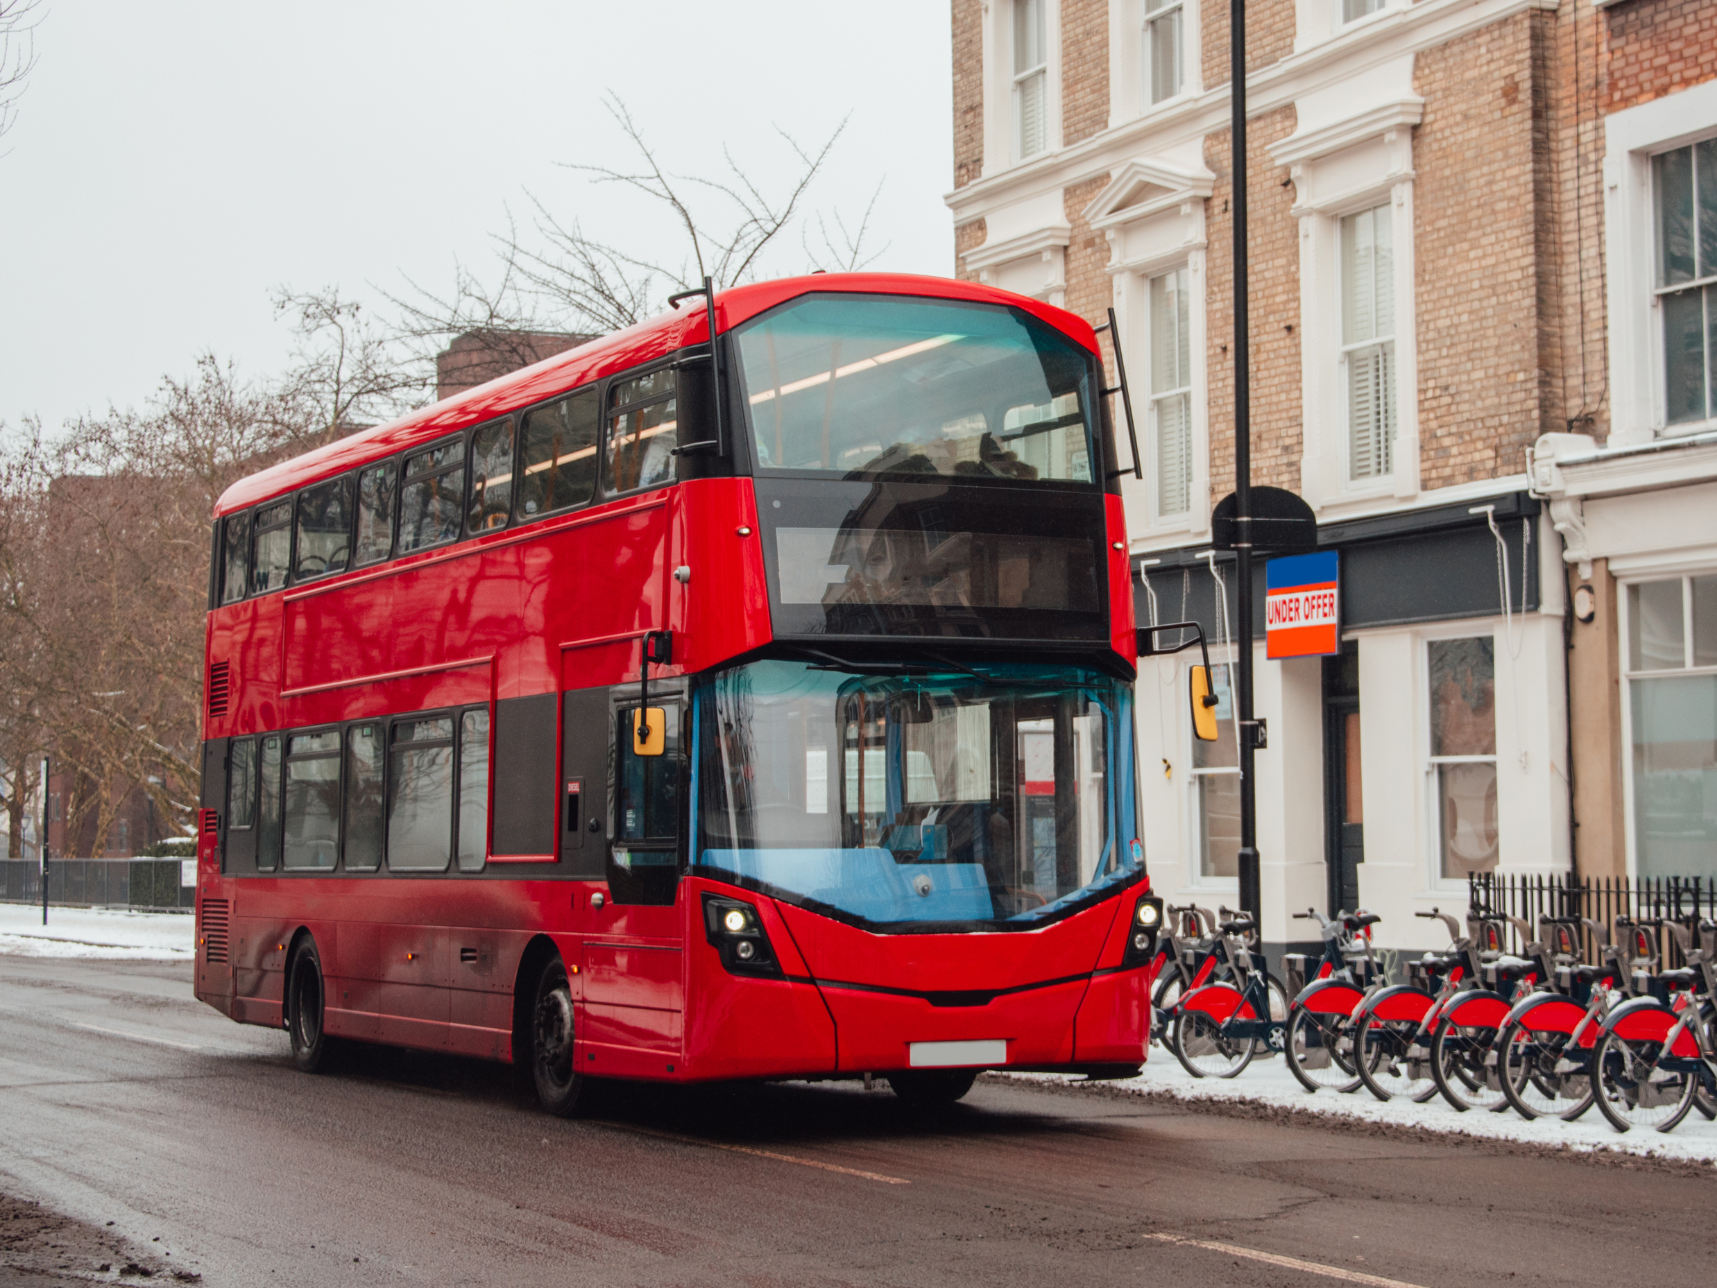 £30 Million in TfL Funding to Improve London Bus Services